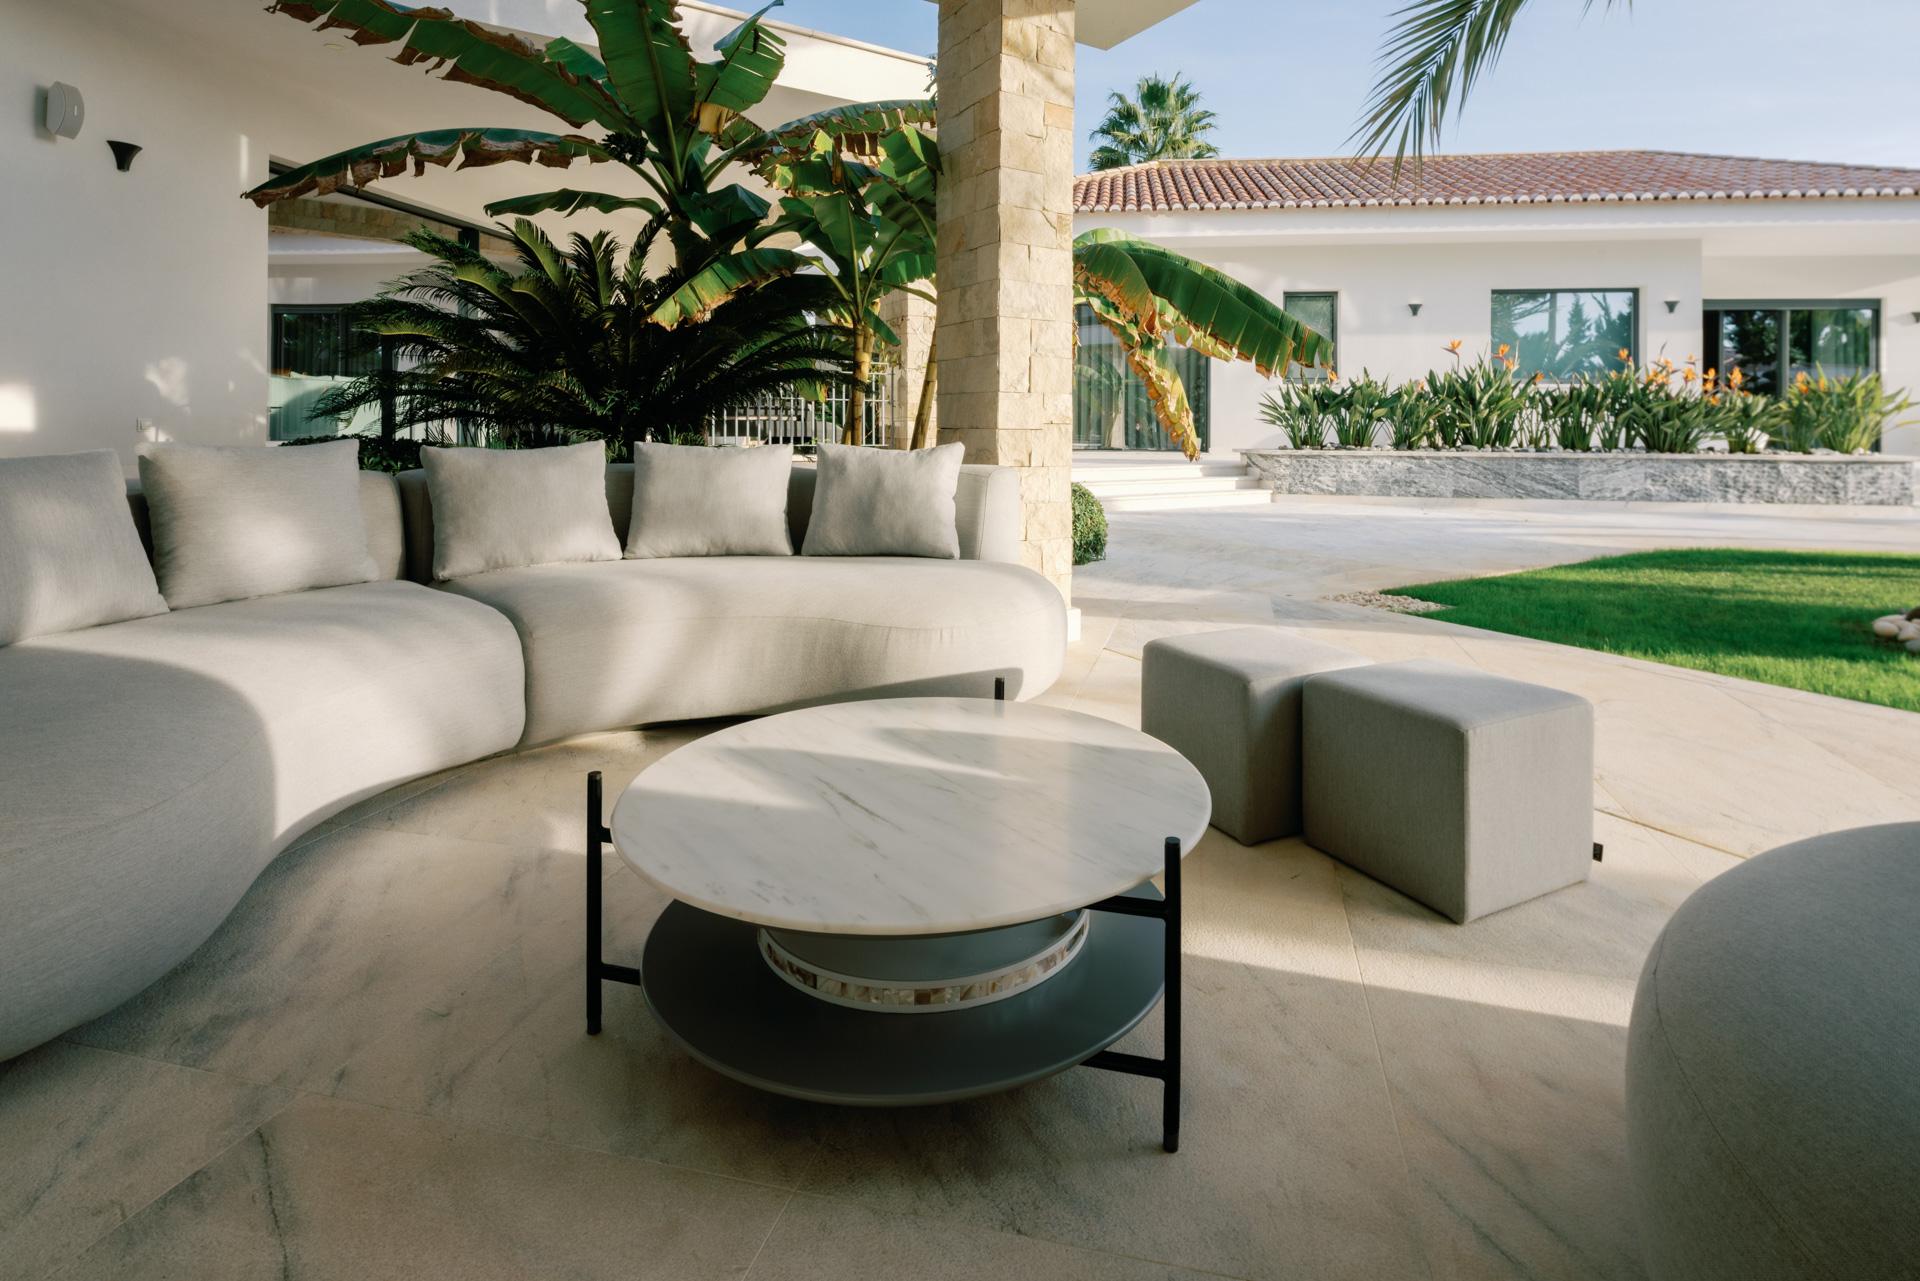 Leather Modern Twins Outdoors Sofa, Sunbrella Fabric, Handmade in Portugal by Greenapple For Sale